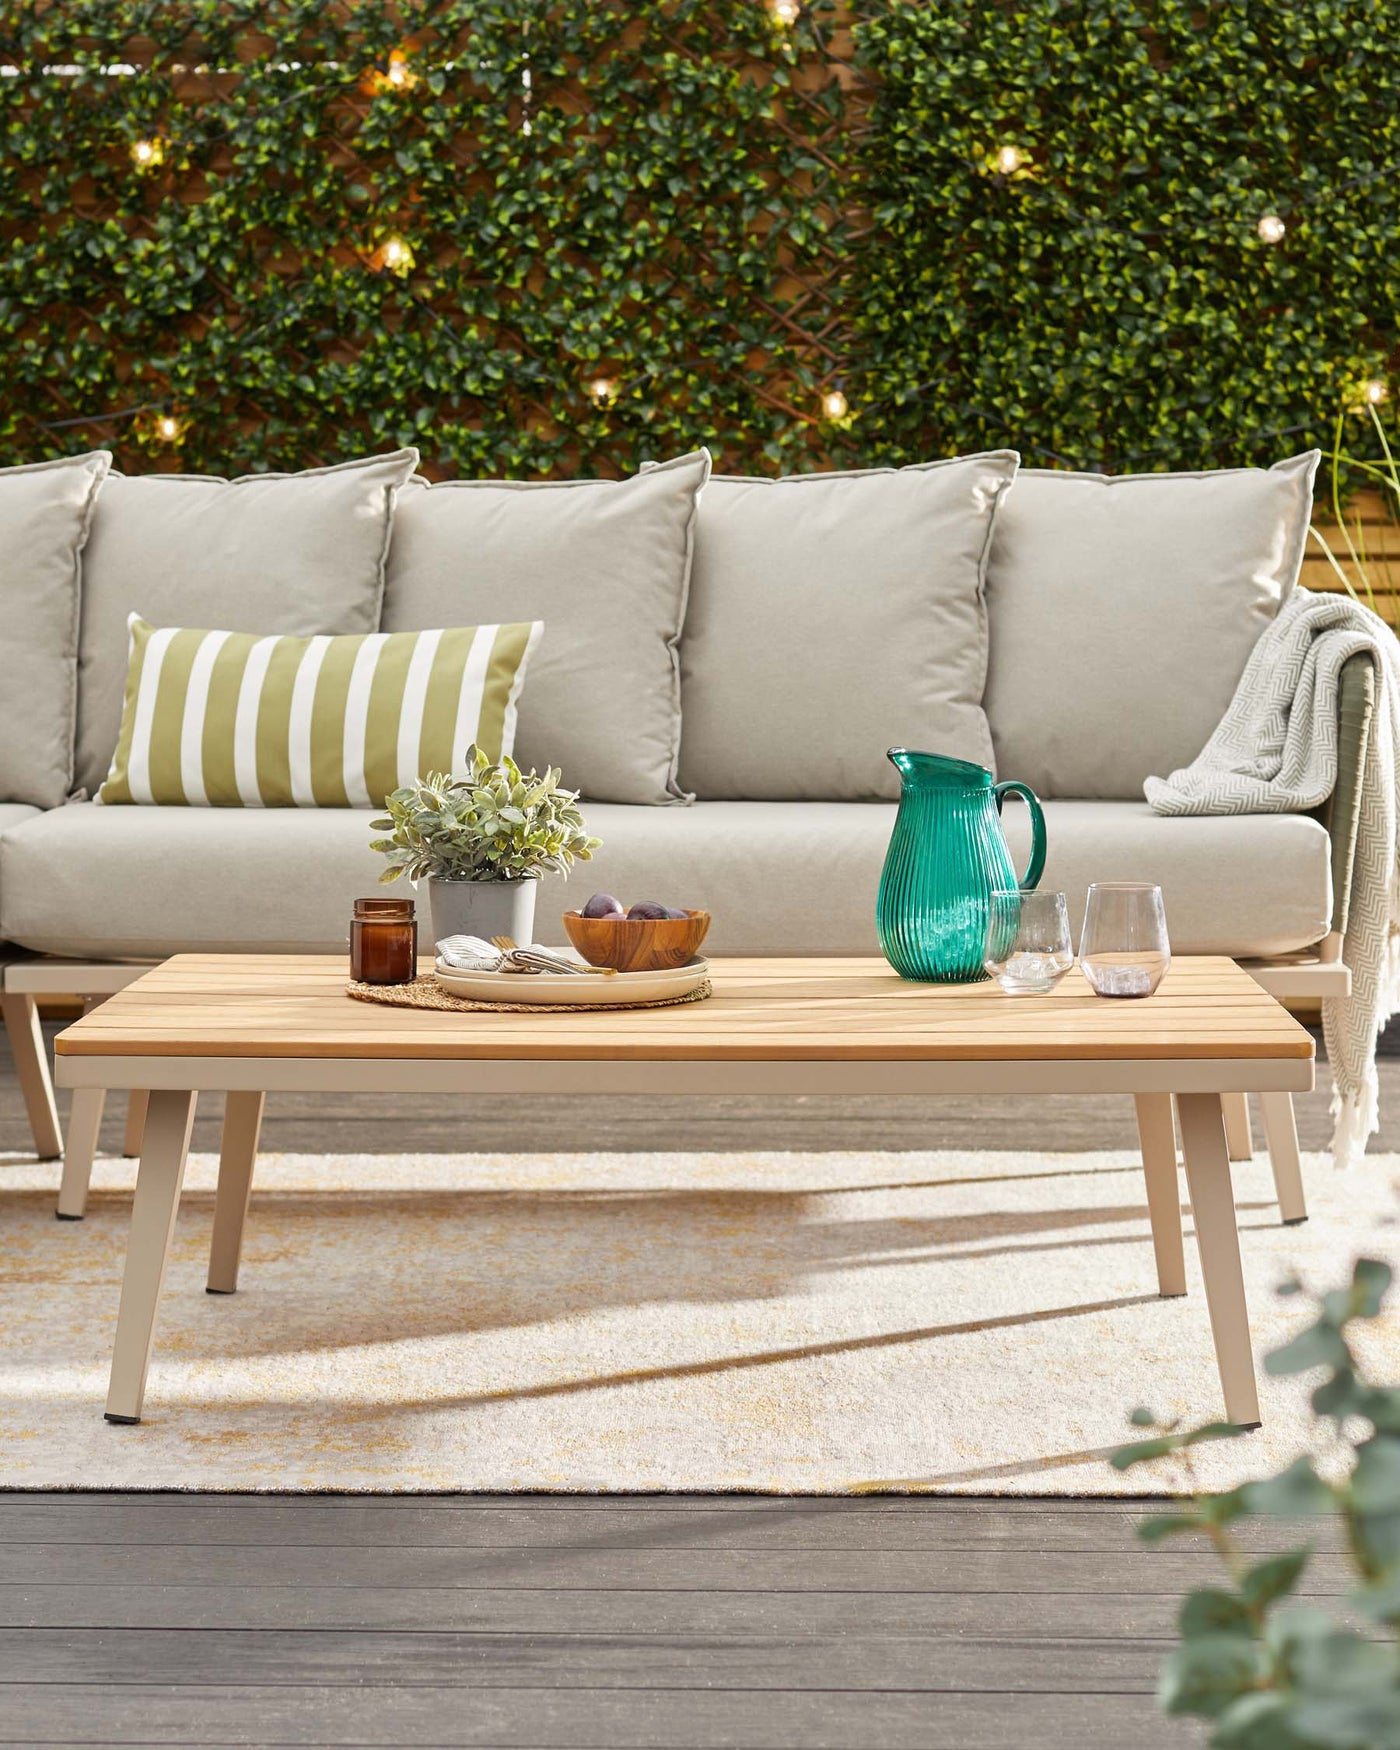 Outdoor furniture set featuring a modern beige sofa with plush cushions and a light grey wooden coffee table on a cosy patio area. The sofa is accented with a mix of solid and striped throw pillows, and a knit blanket for additional comfort. The coffee table is adorned with a plant, a teal glass pitcher, and a wooden bowl with fruits, creating a welcoming entertainment space.